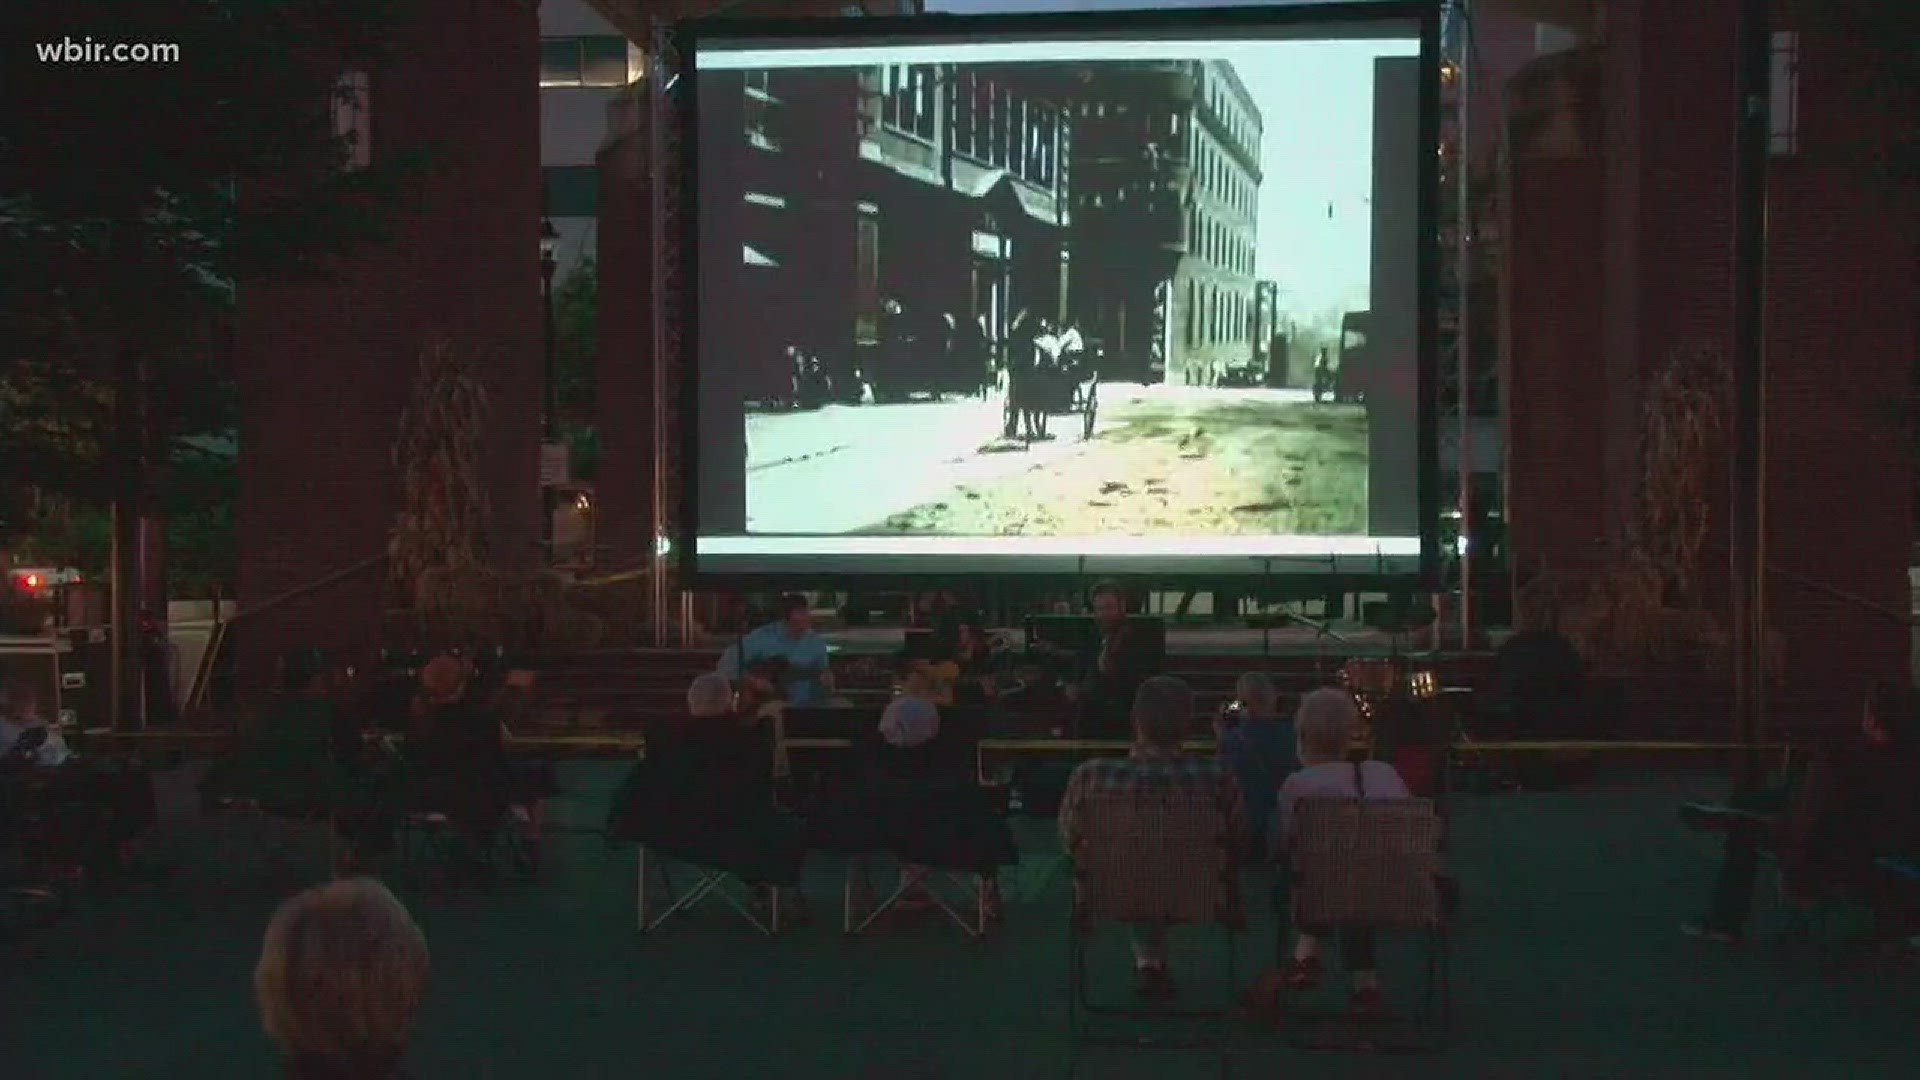 Oct. 20, 2017: Hundreds of people gathered in Market Square to watch some old-fashioned movies.